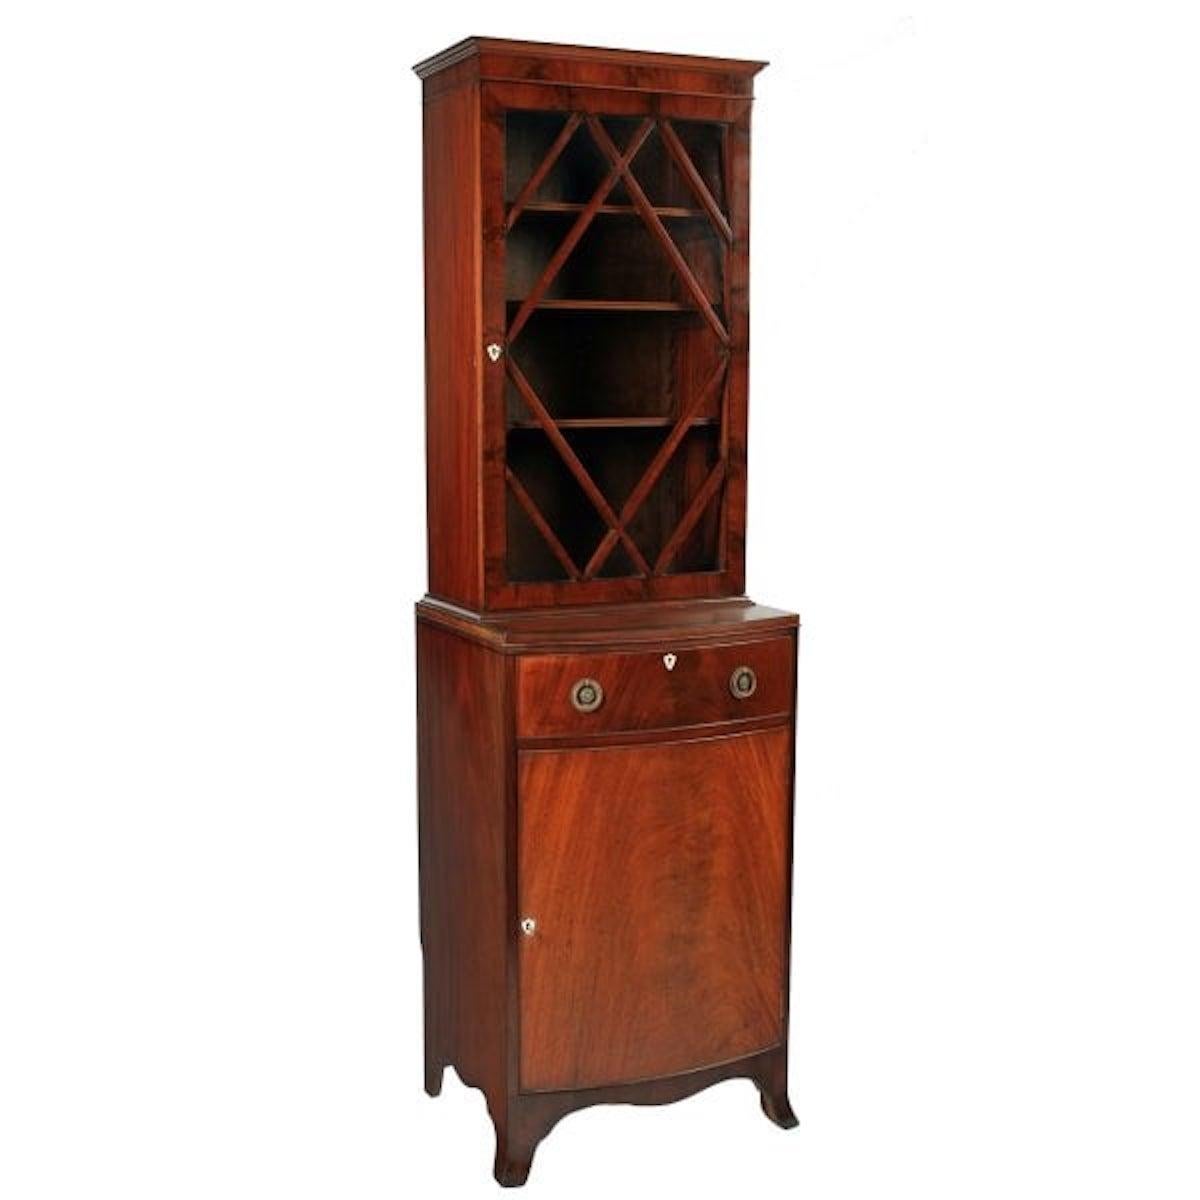 A Regency style early 20th century mahogany bookcase.

The bookcase comprises of a glazed upper section and a bowfronted cupboard lower section.

The upper glazed section has slim astragals at angles across the glass and on the door frame a